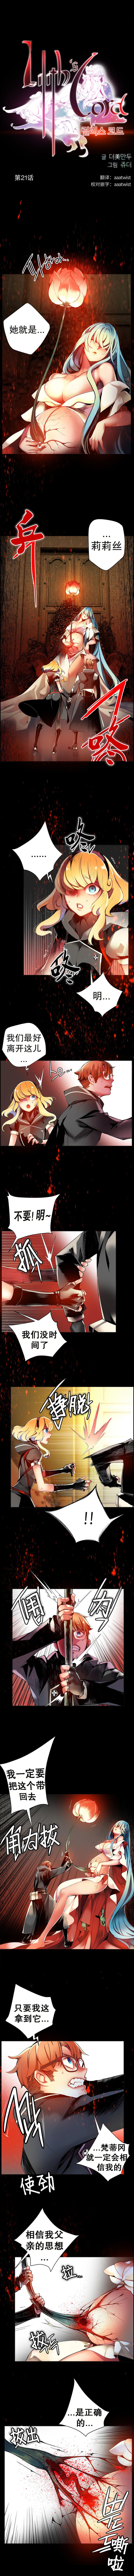 [Juder] 莉莉丝的脐带(Lilith`s Cord) Ch.1-22 [Chinese] 383